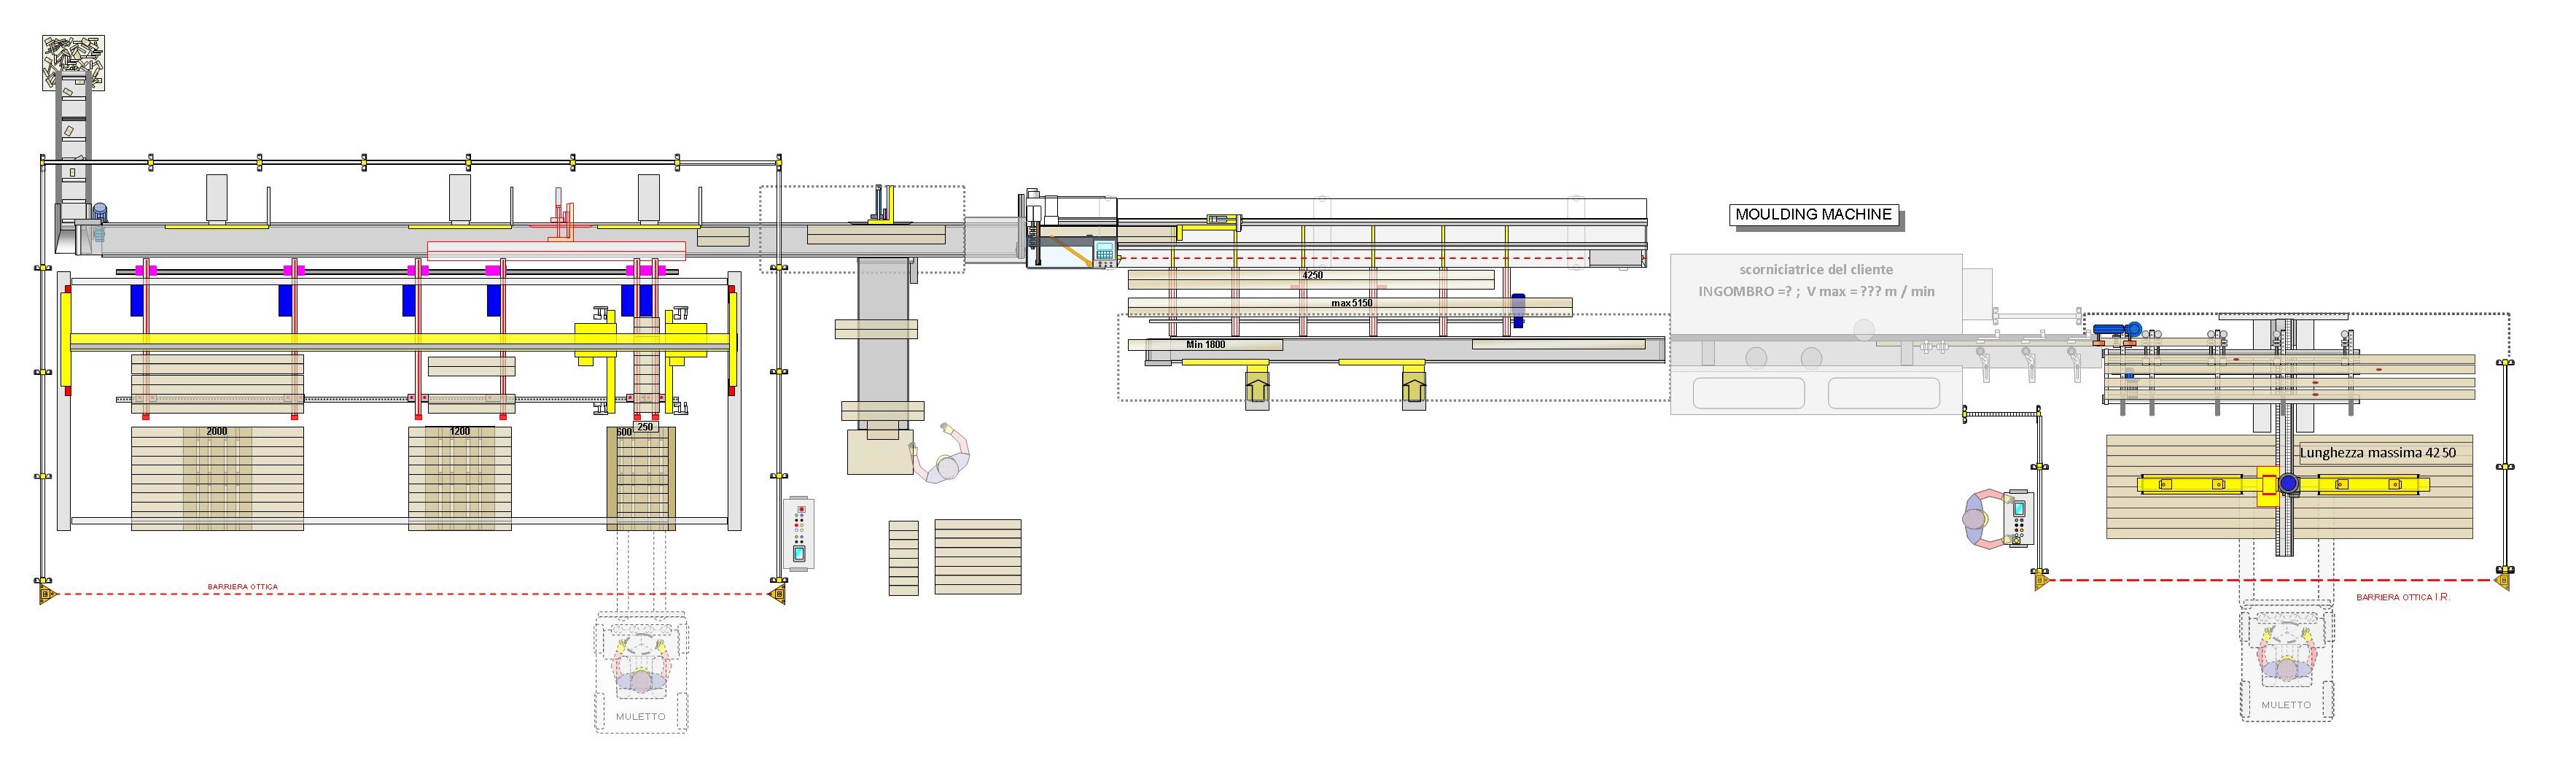 optimizing-push-feed-saws-trsi-500-integrated-drilling-system-Concept 05